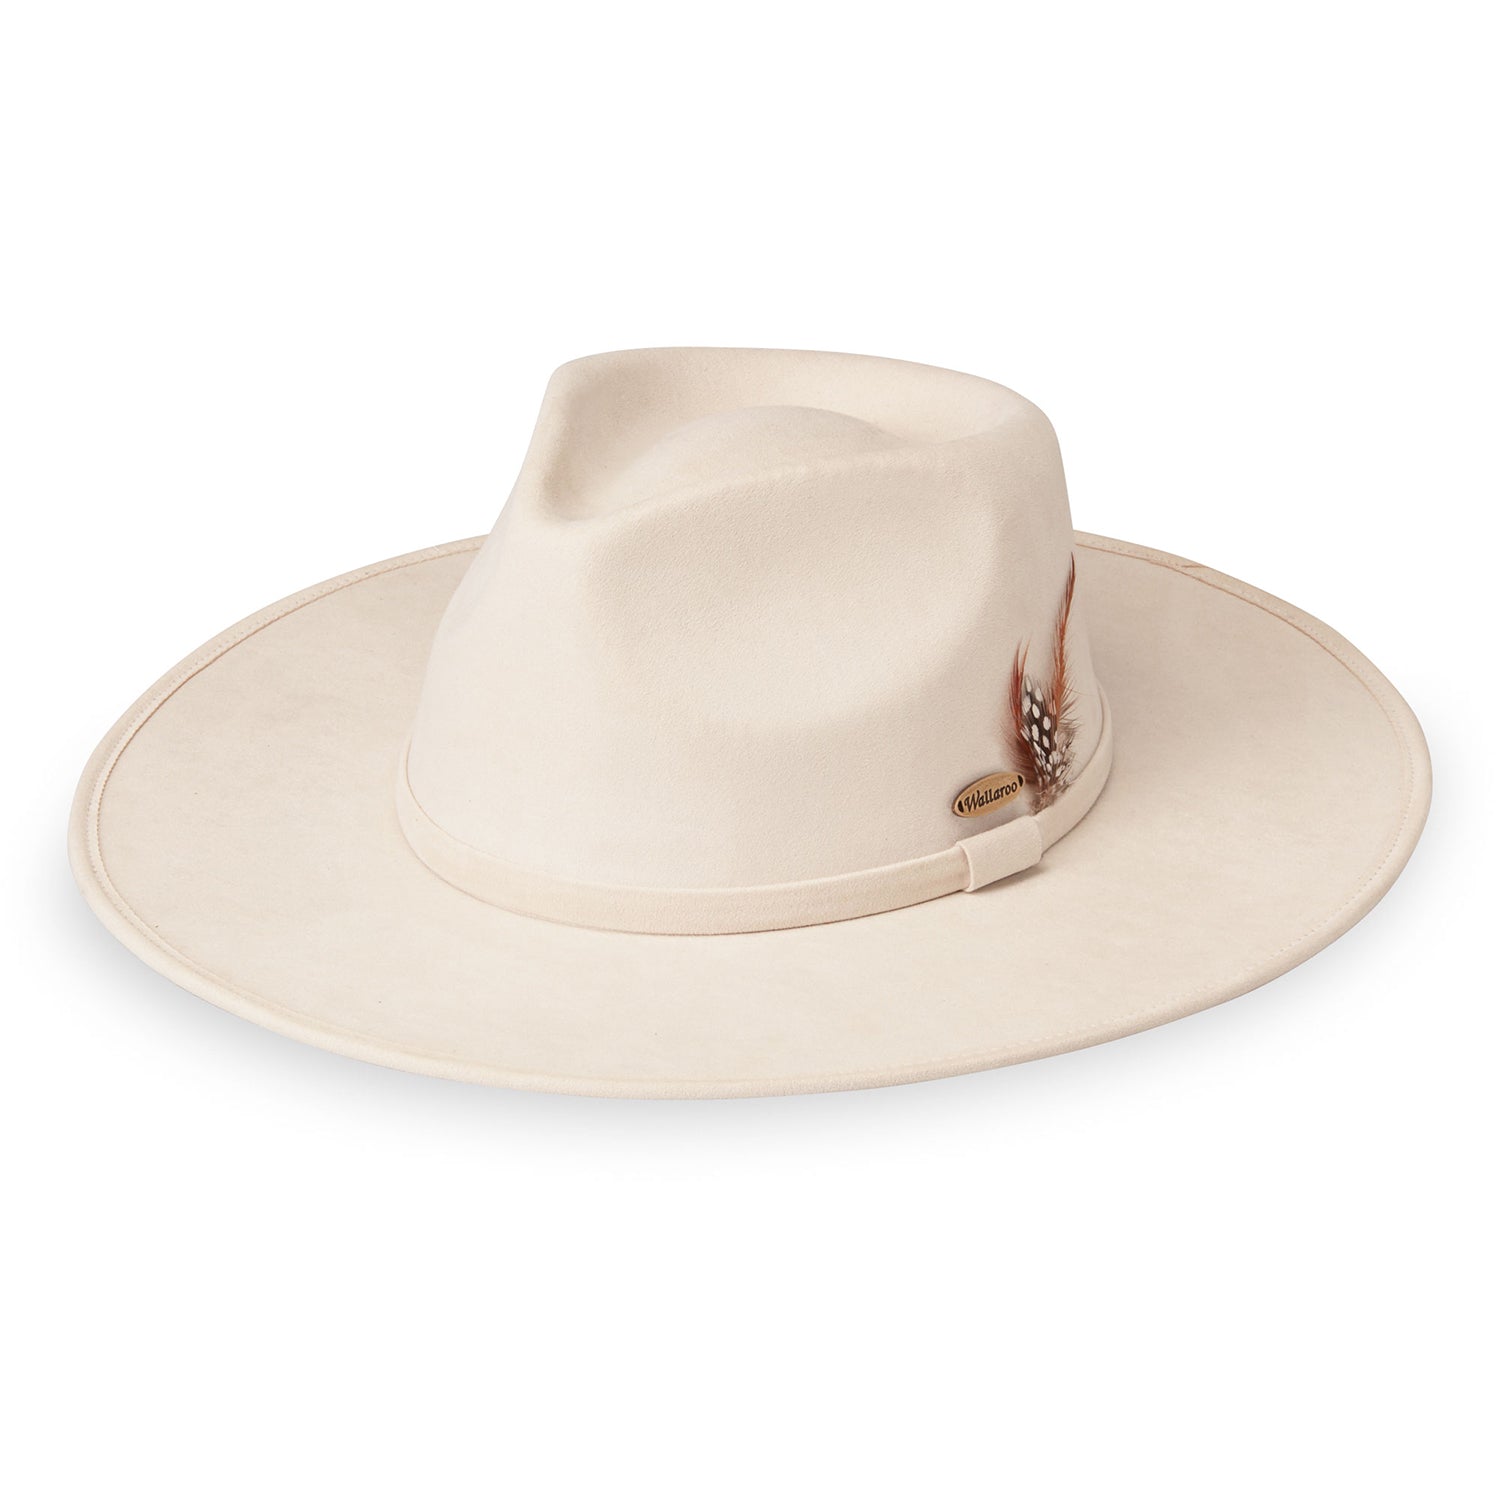 Featuring Ladies' winter sun hat with a big wide brim